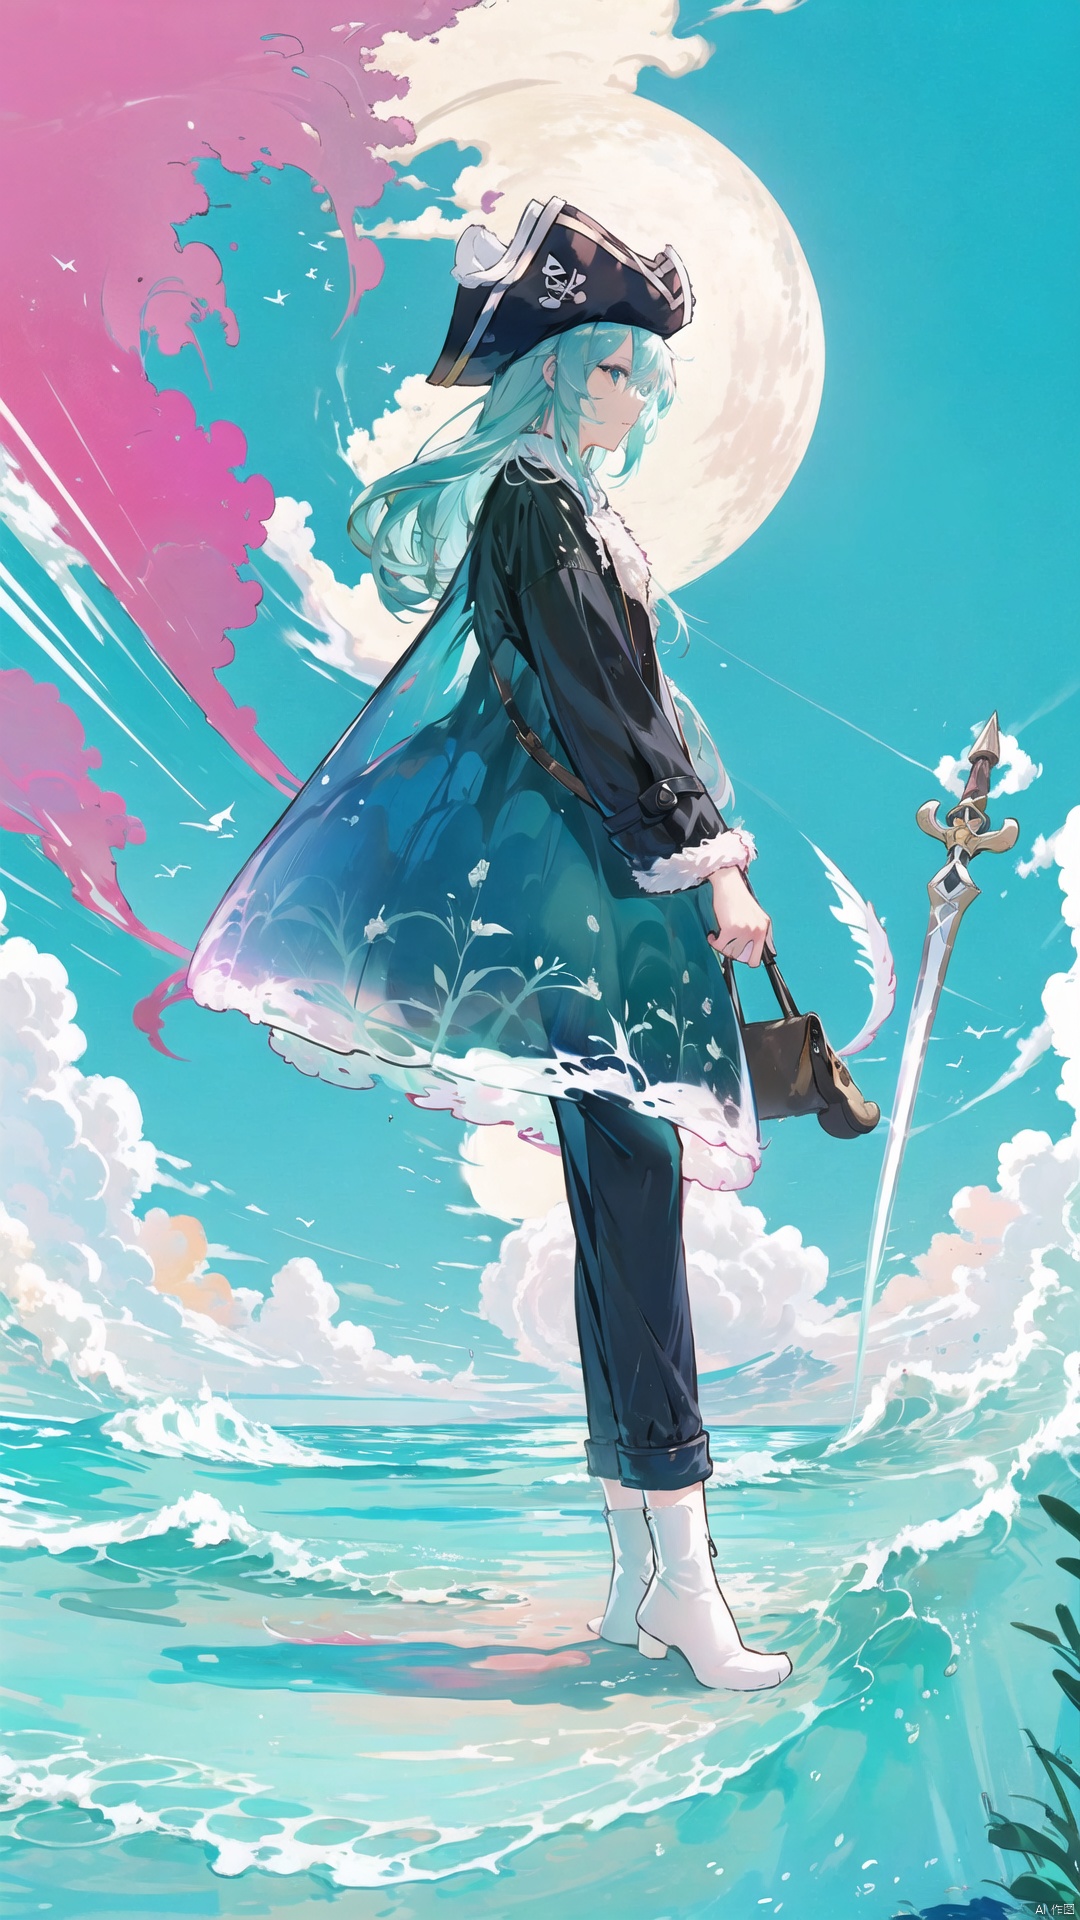 miku,pirate,ship,sea,sky,clouds,sun,parrot,hat,coat,pants,boots,sword,gun,treasure,map,blue,red,white,cool,adventurous,exciting,foreground,middle ground,background,angle,side view,light,bright,sharp,color,contrasting,atmosphere,thrilling,anime